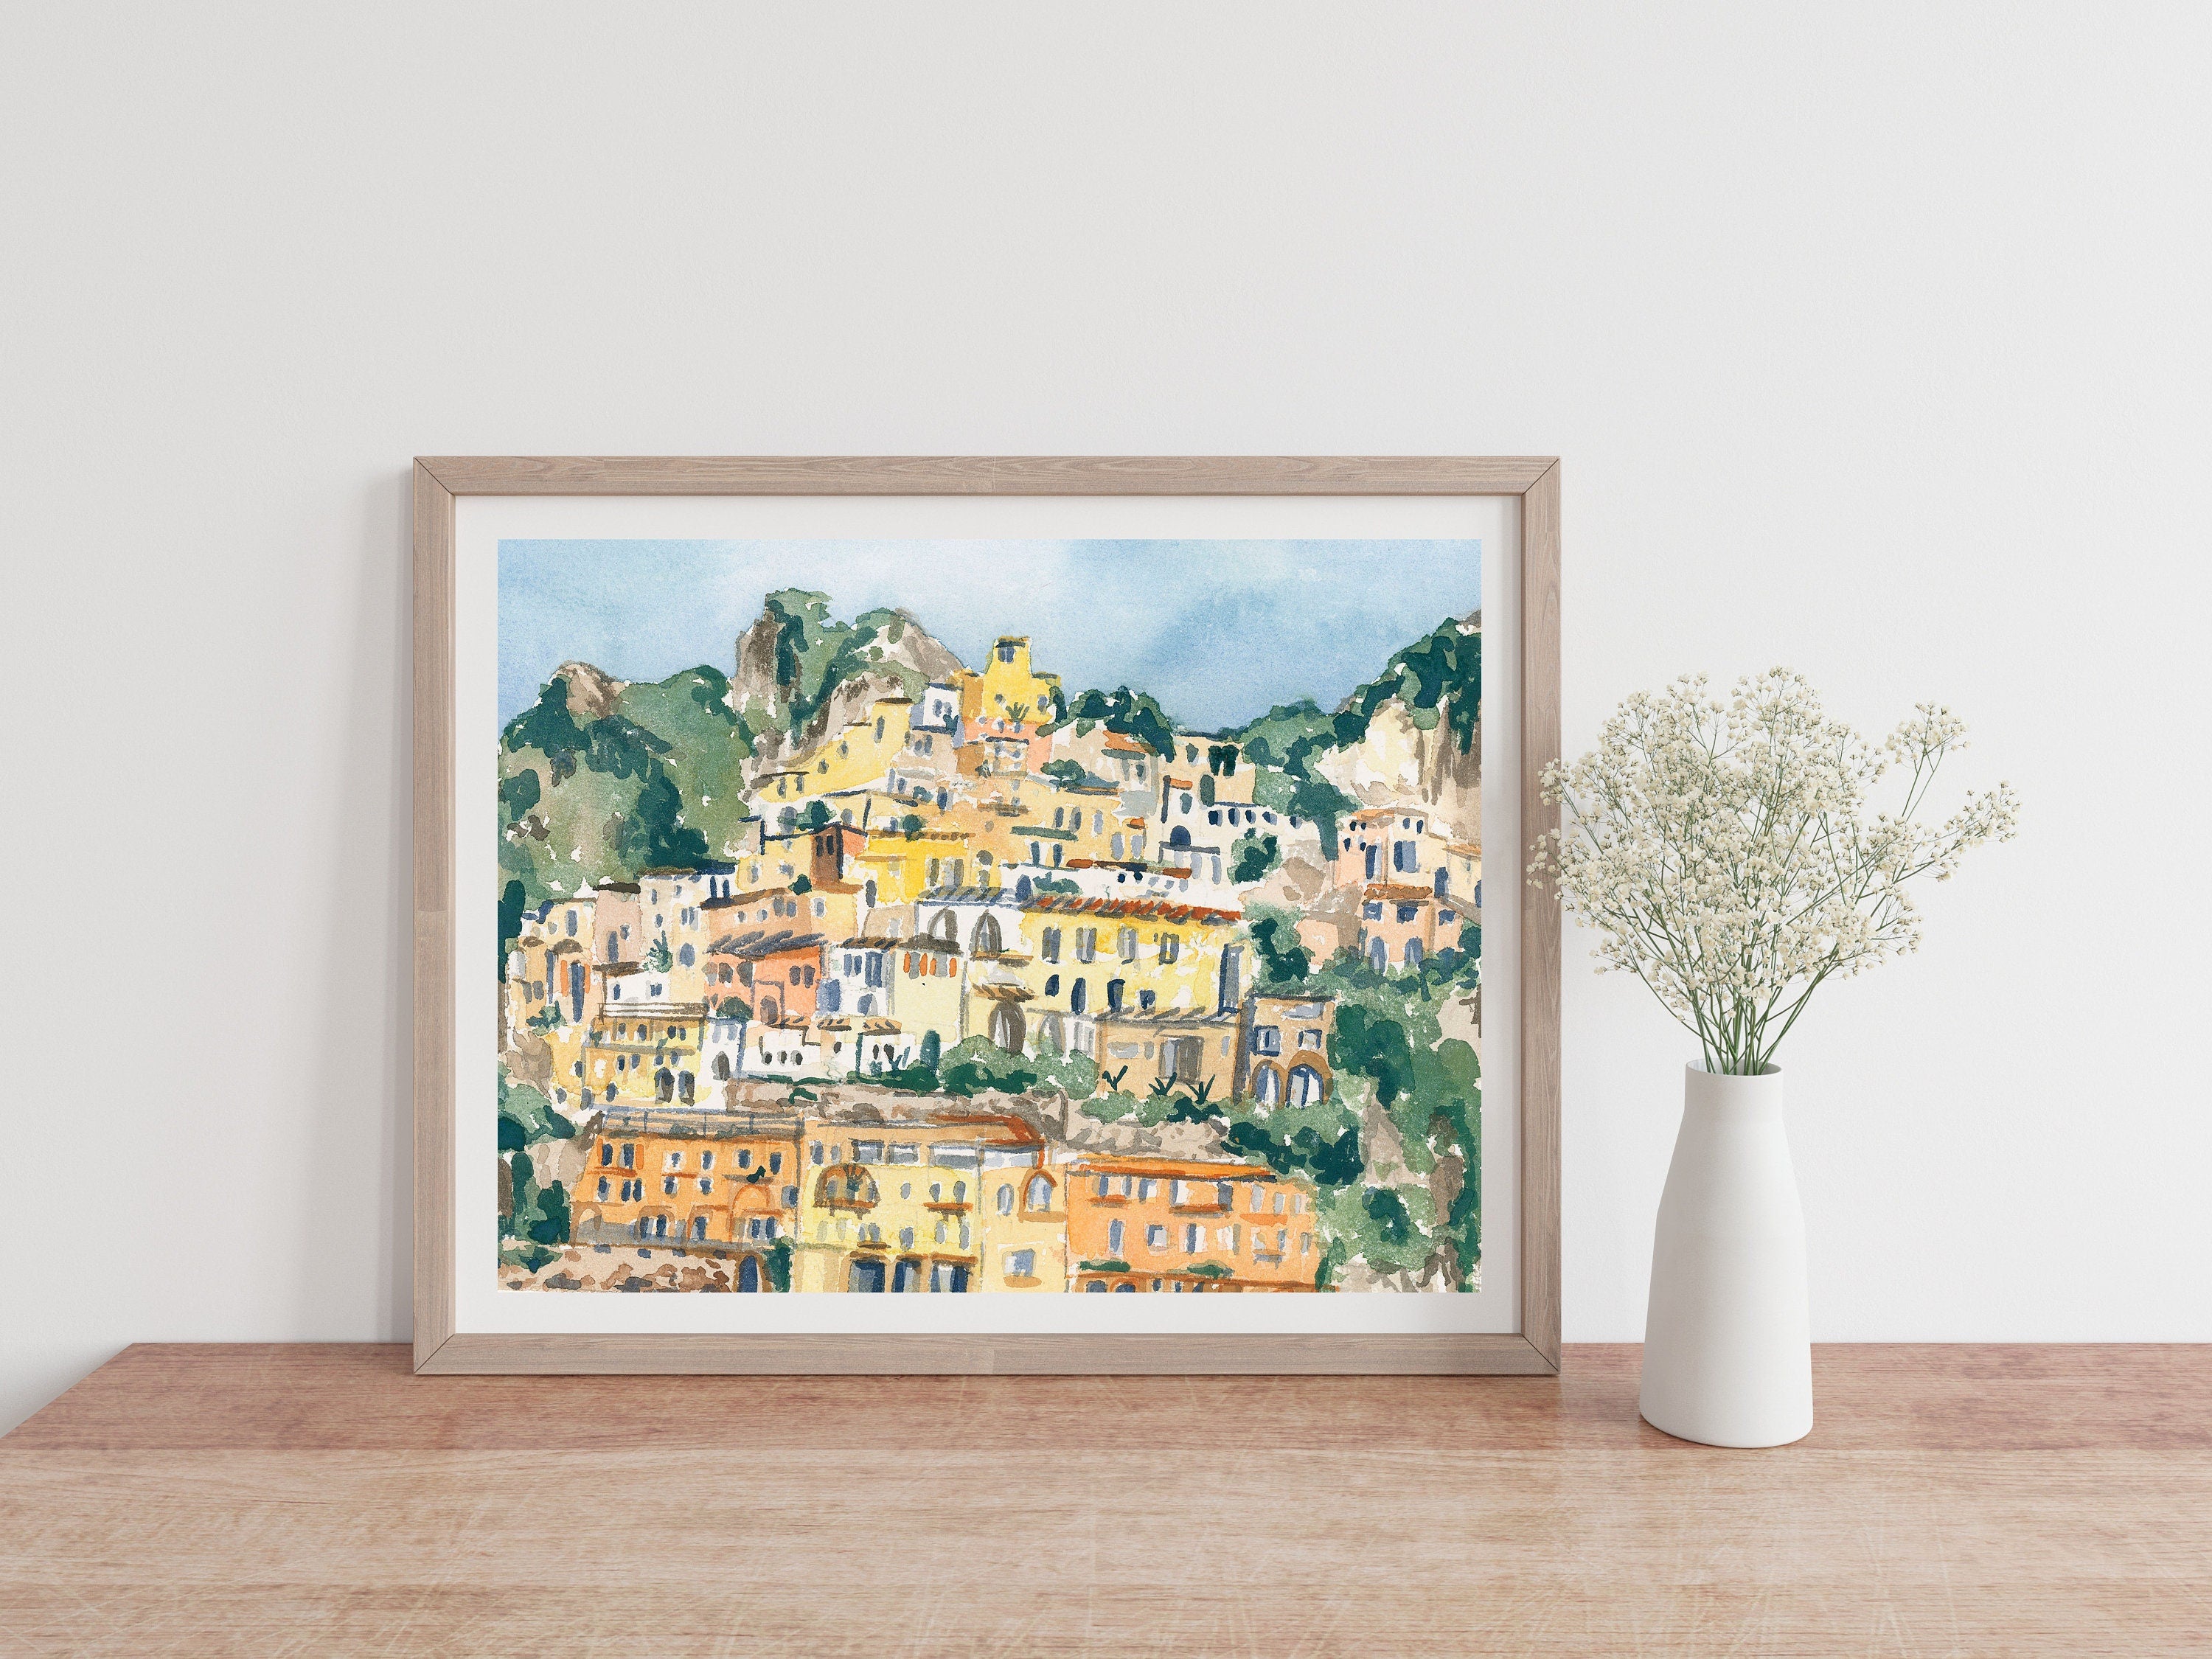 Amalfi coast building print of painting by Medjool Studio. Print of original gouache painting with pink and yellow building features from Amalfi coast town Positano in Italy and surrounding greenery.